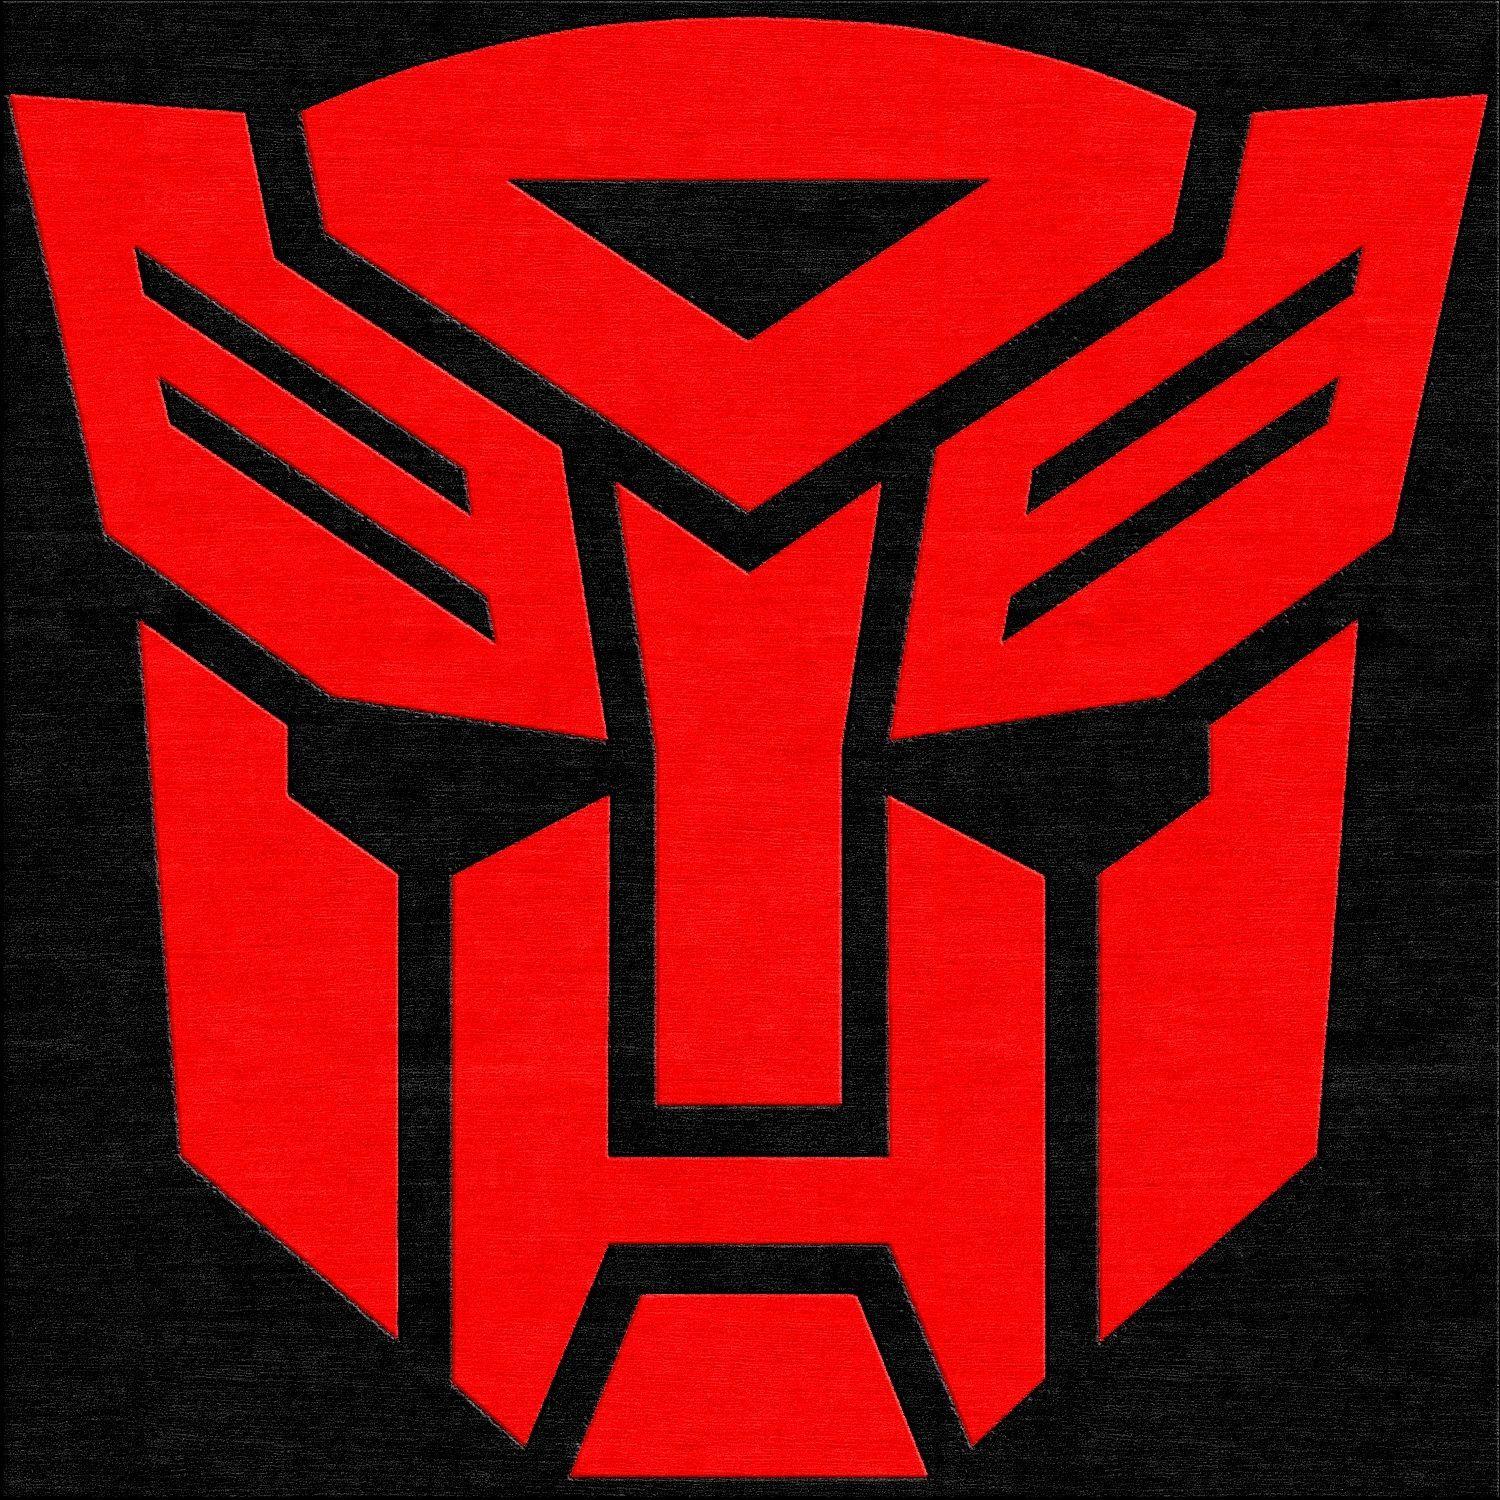 Red Transformers Logo - Childrens Rugs. Transformers. Transformers, Rugs, Childrens rugs